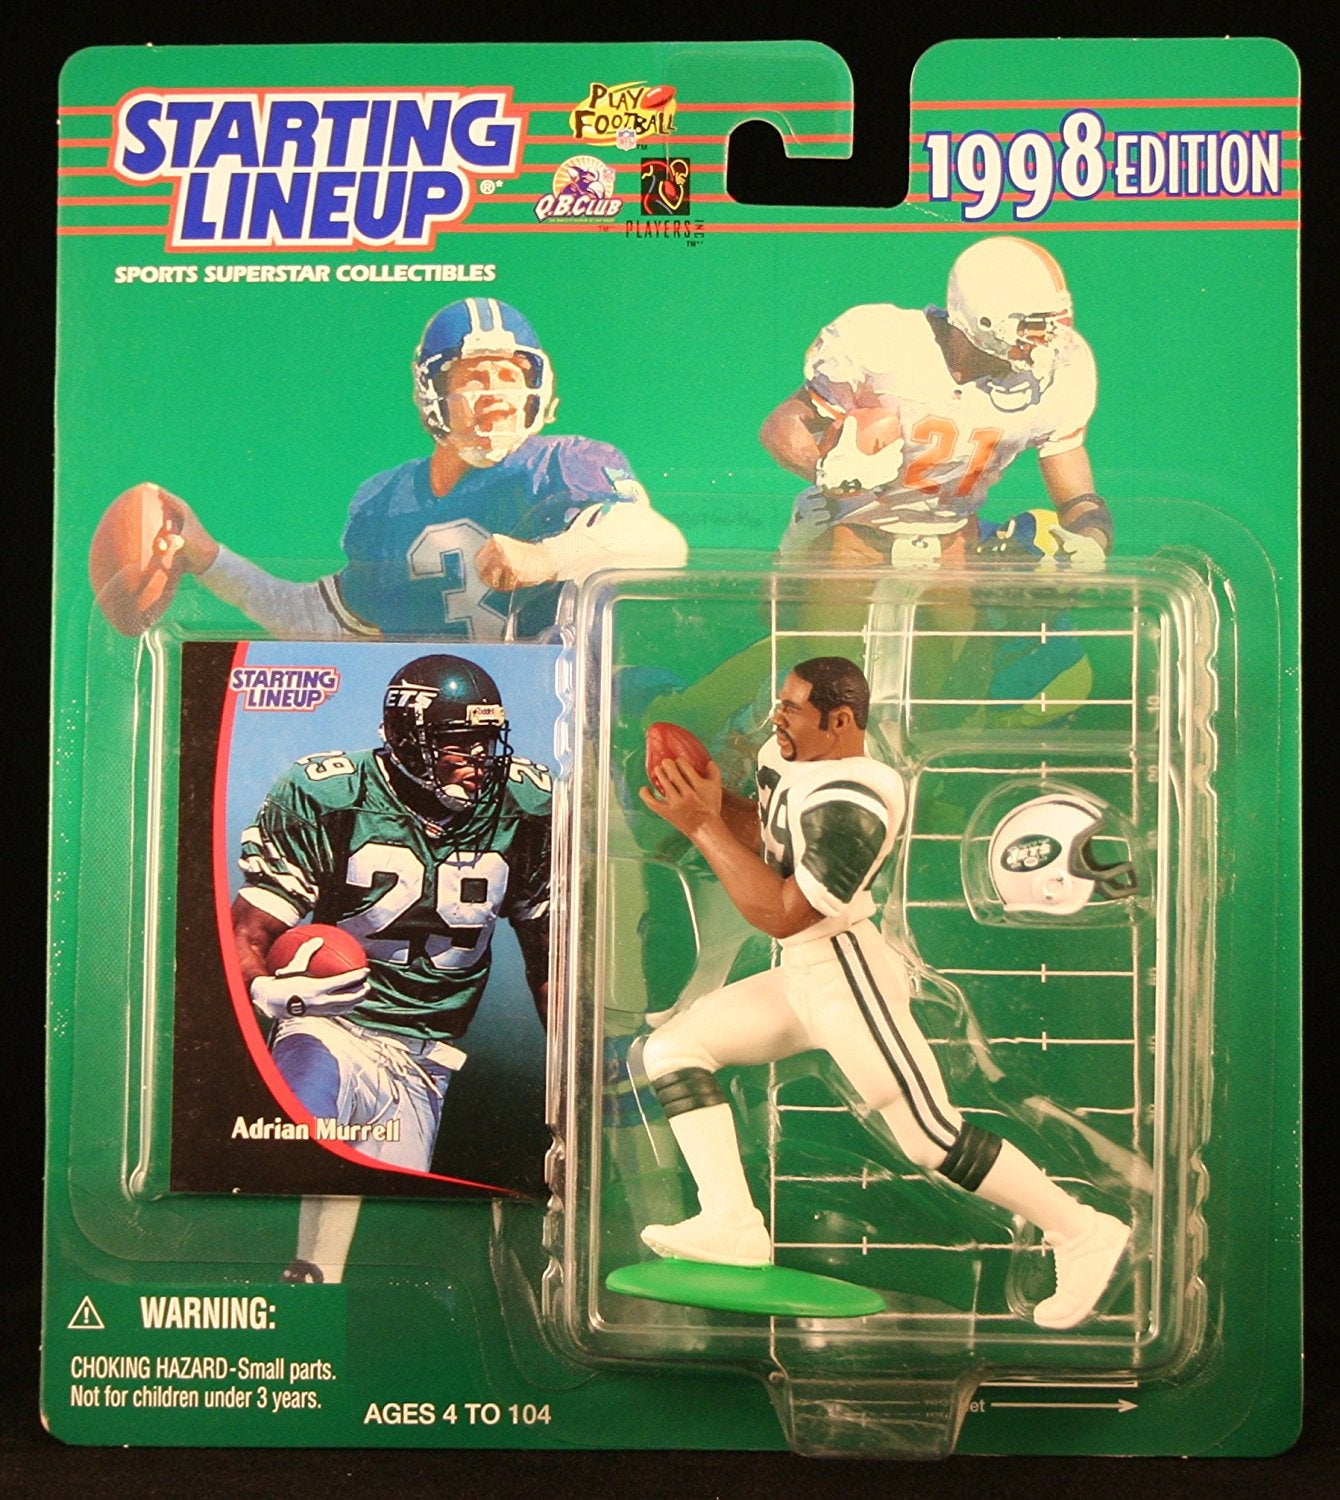 ADRIAN MURRELL / NEW YORK JETS 1998 NFL Starting Lineup Action Figure & Exclusive NFL Collector Trading Card